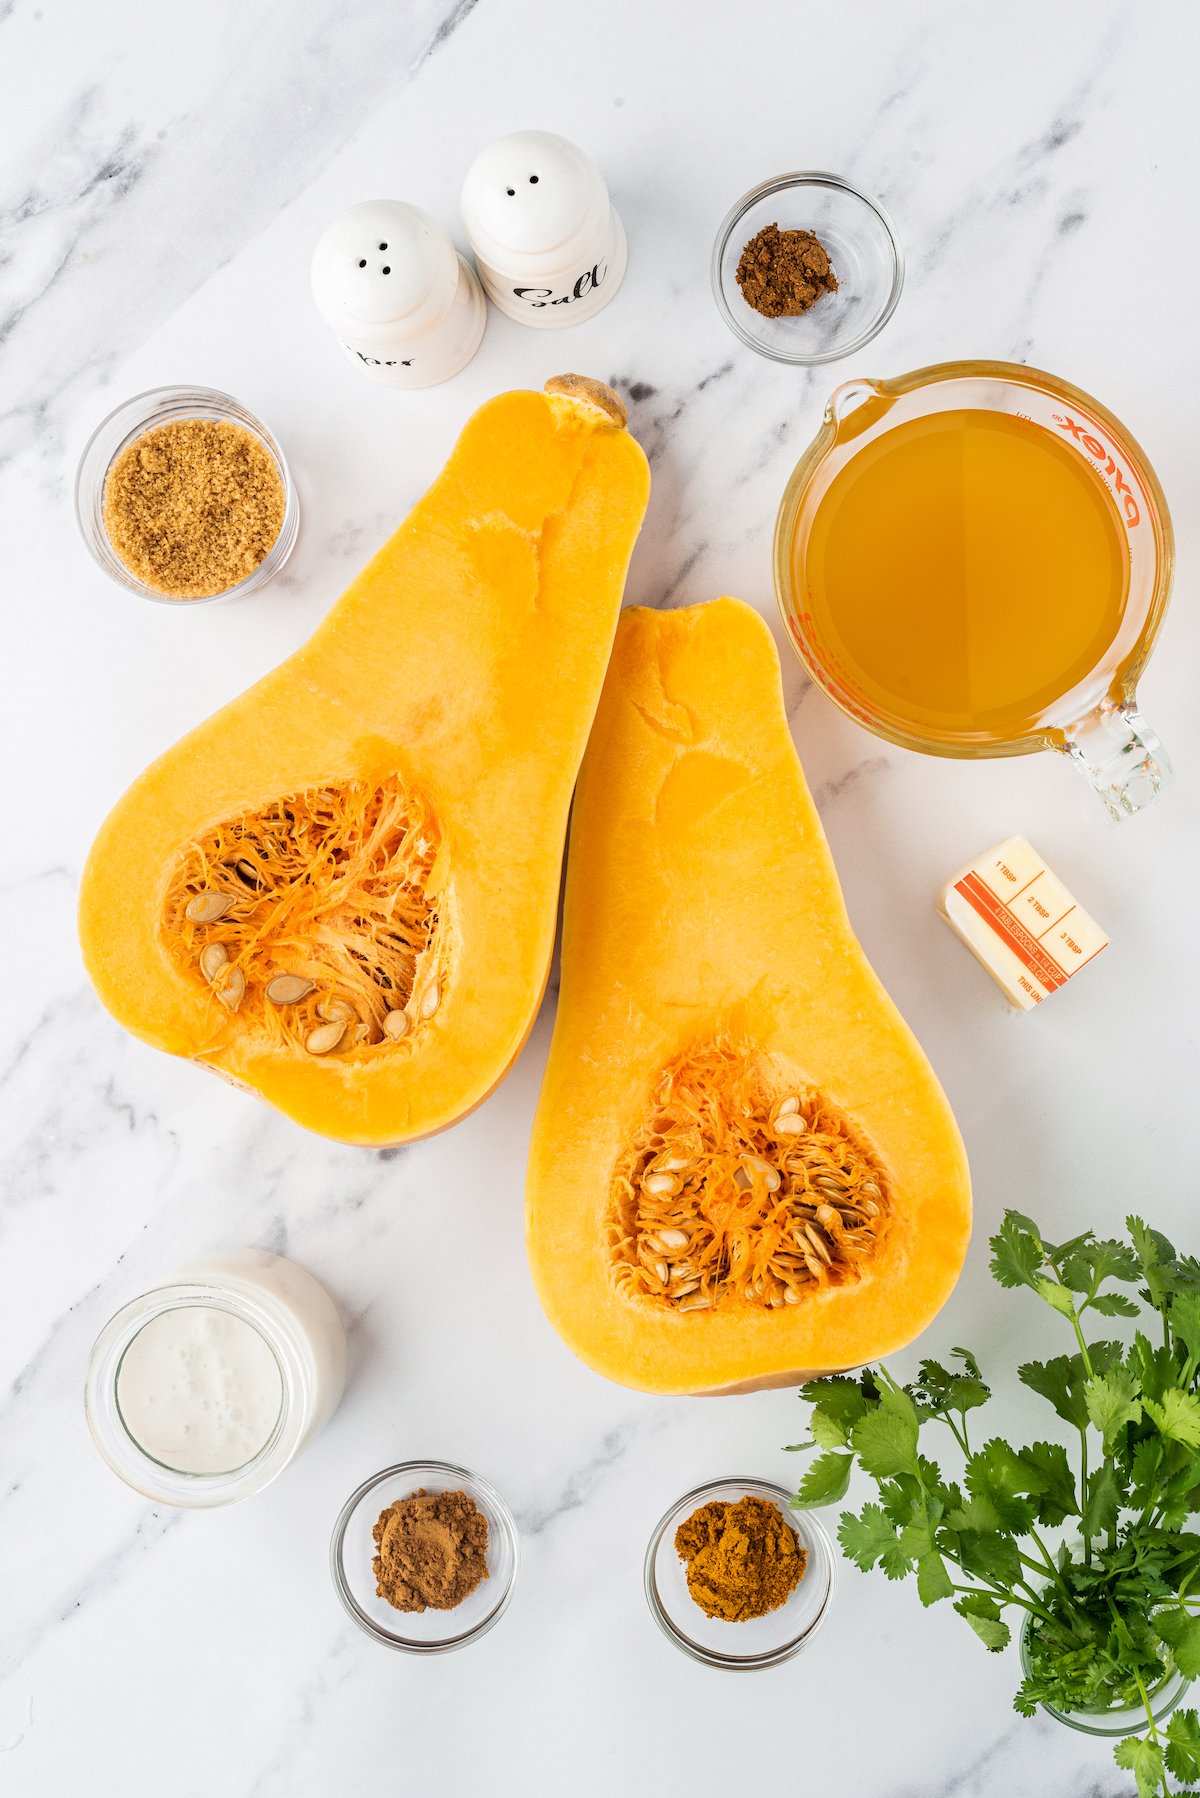 butternut squash cut in half lengthwise alongside spices, butter, and stock on a countertop